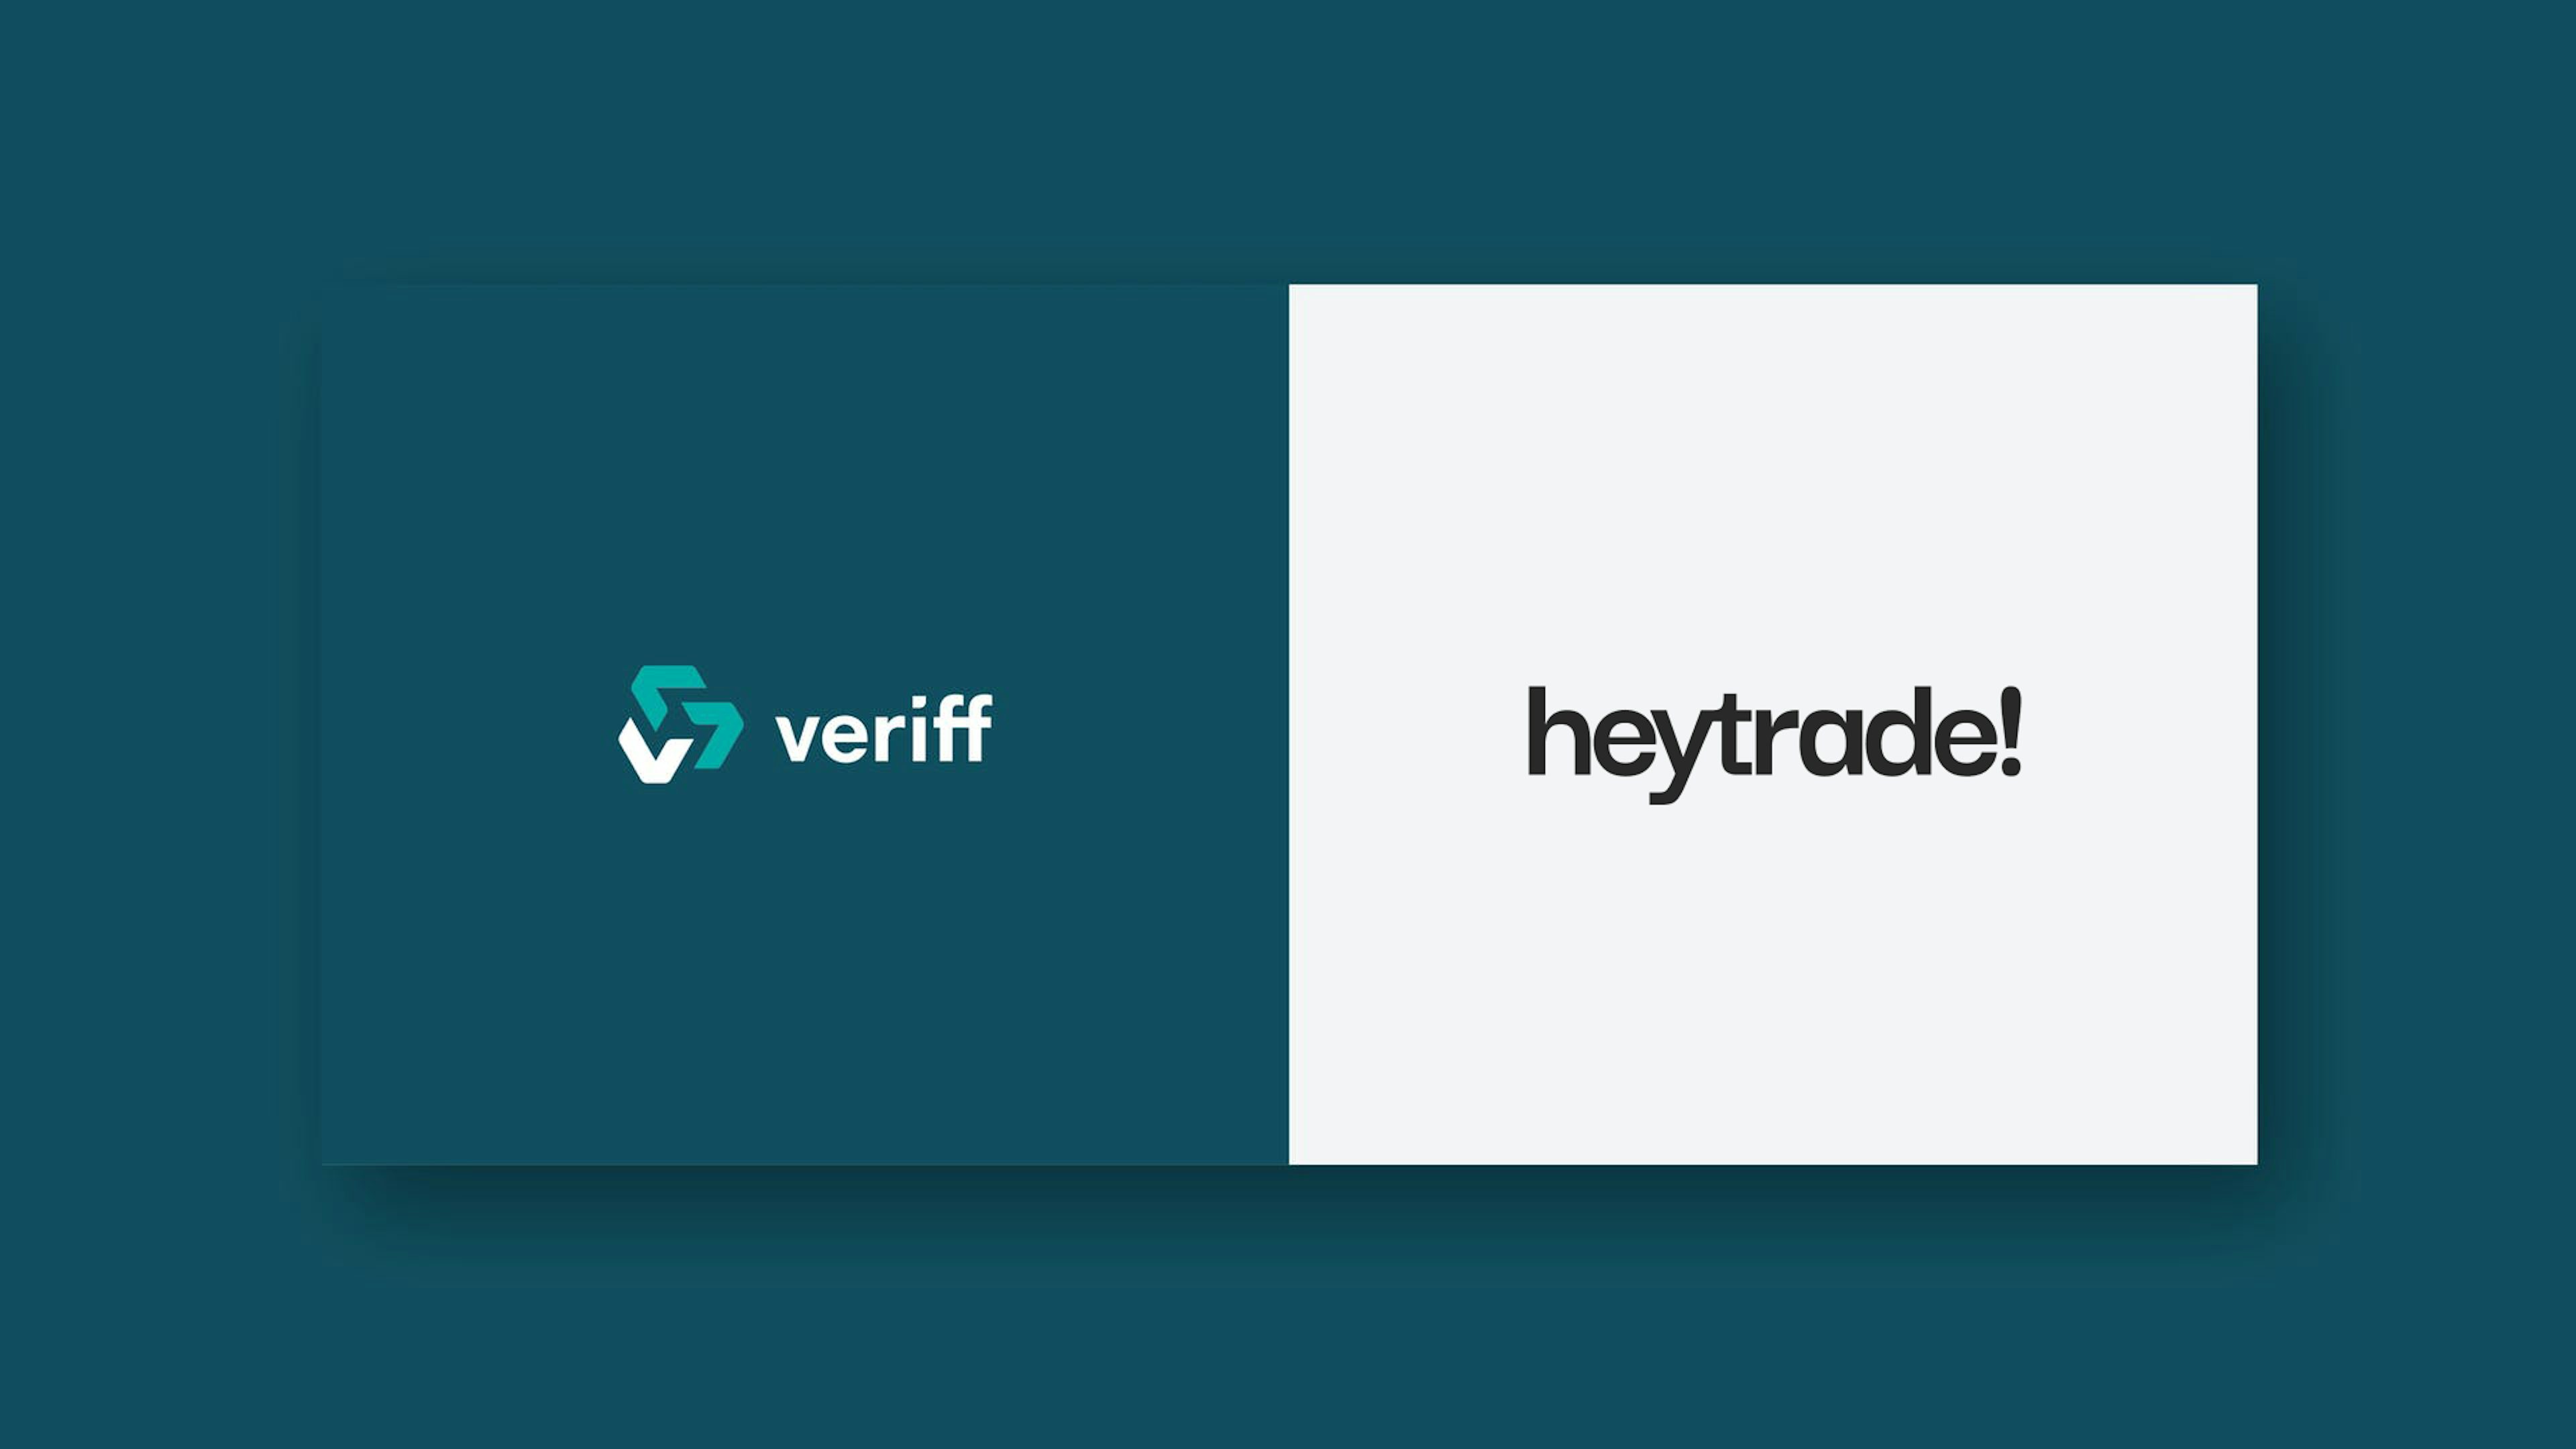 HeyTrade teams up with Veriff for identity verification and KYC compliance